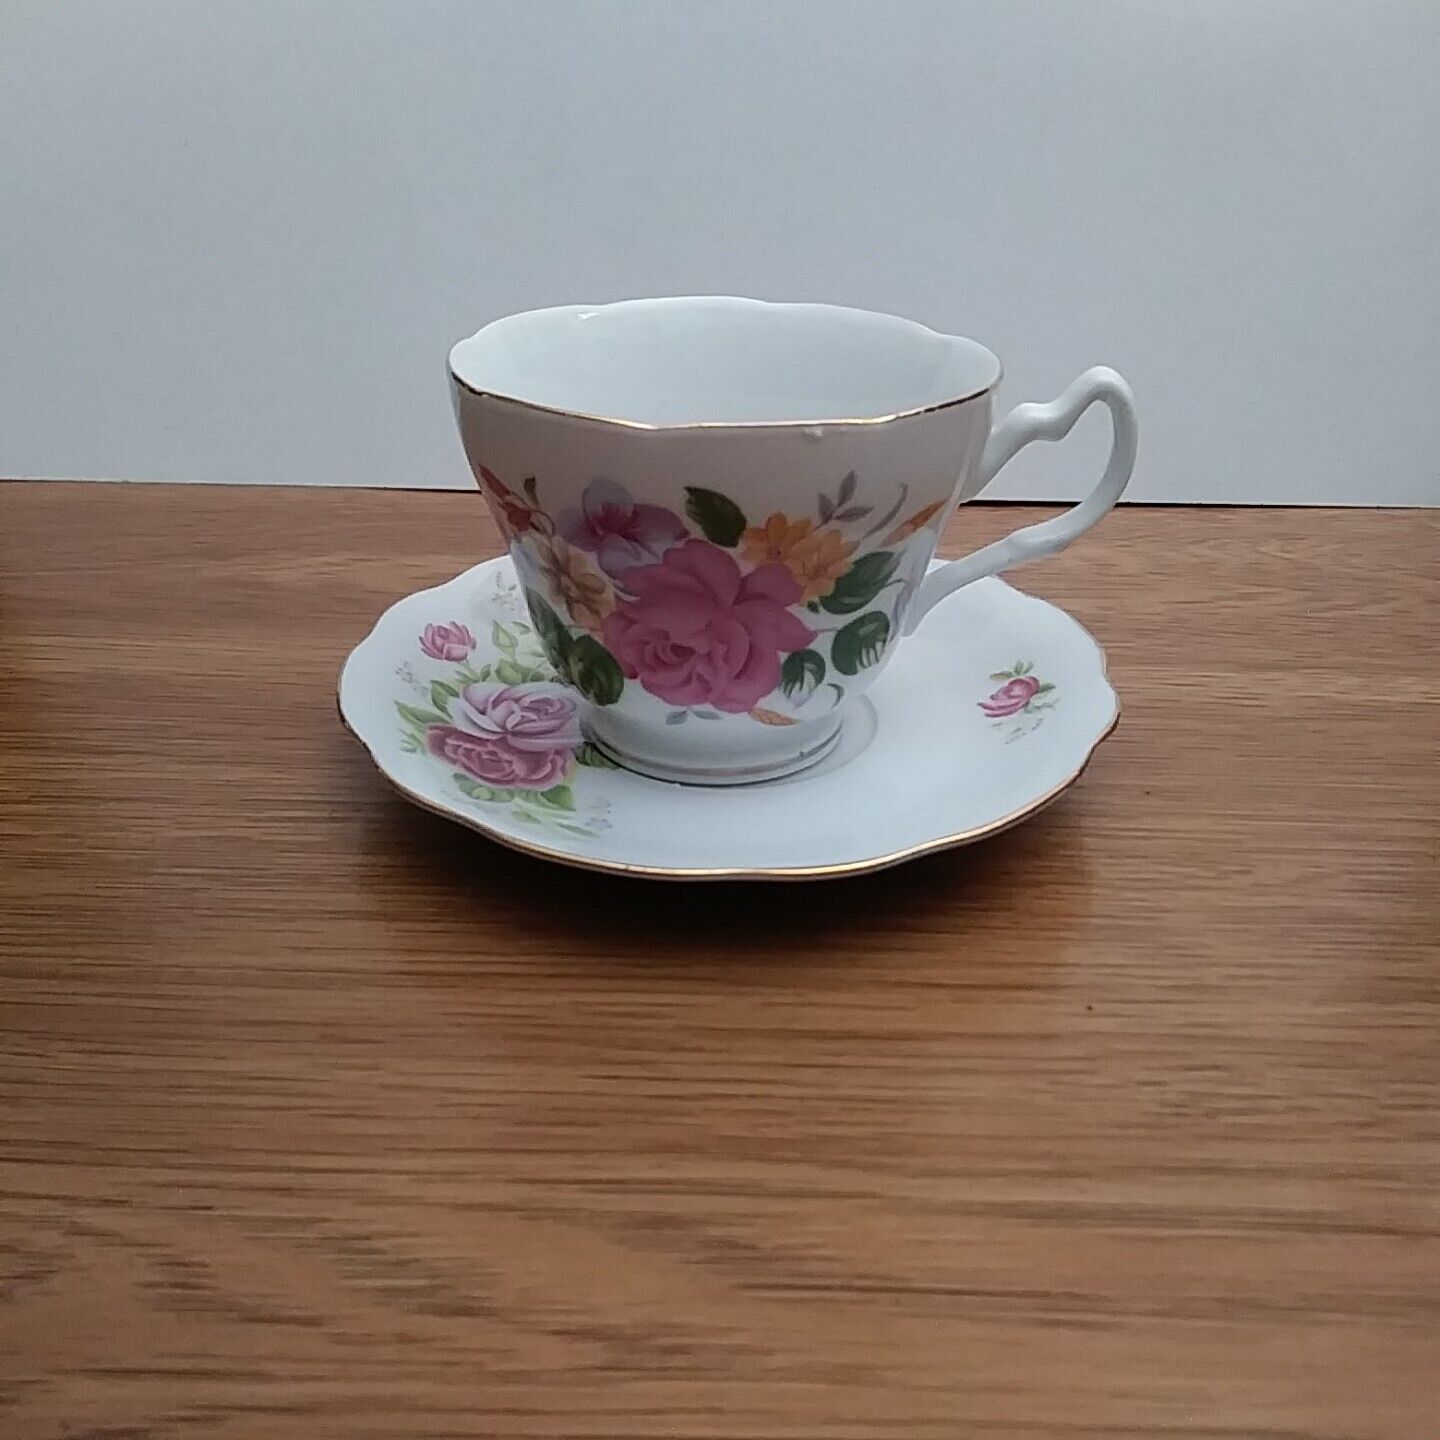 Beautiful Teacup and Saucer with Flowers made in China.